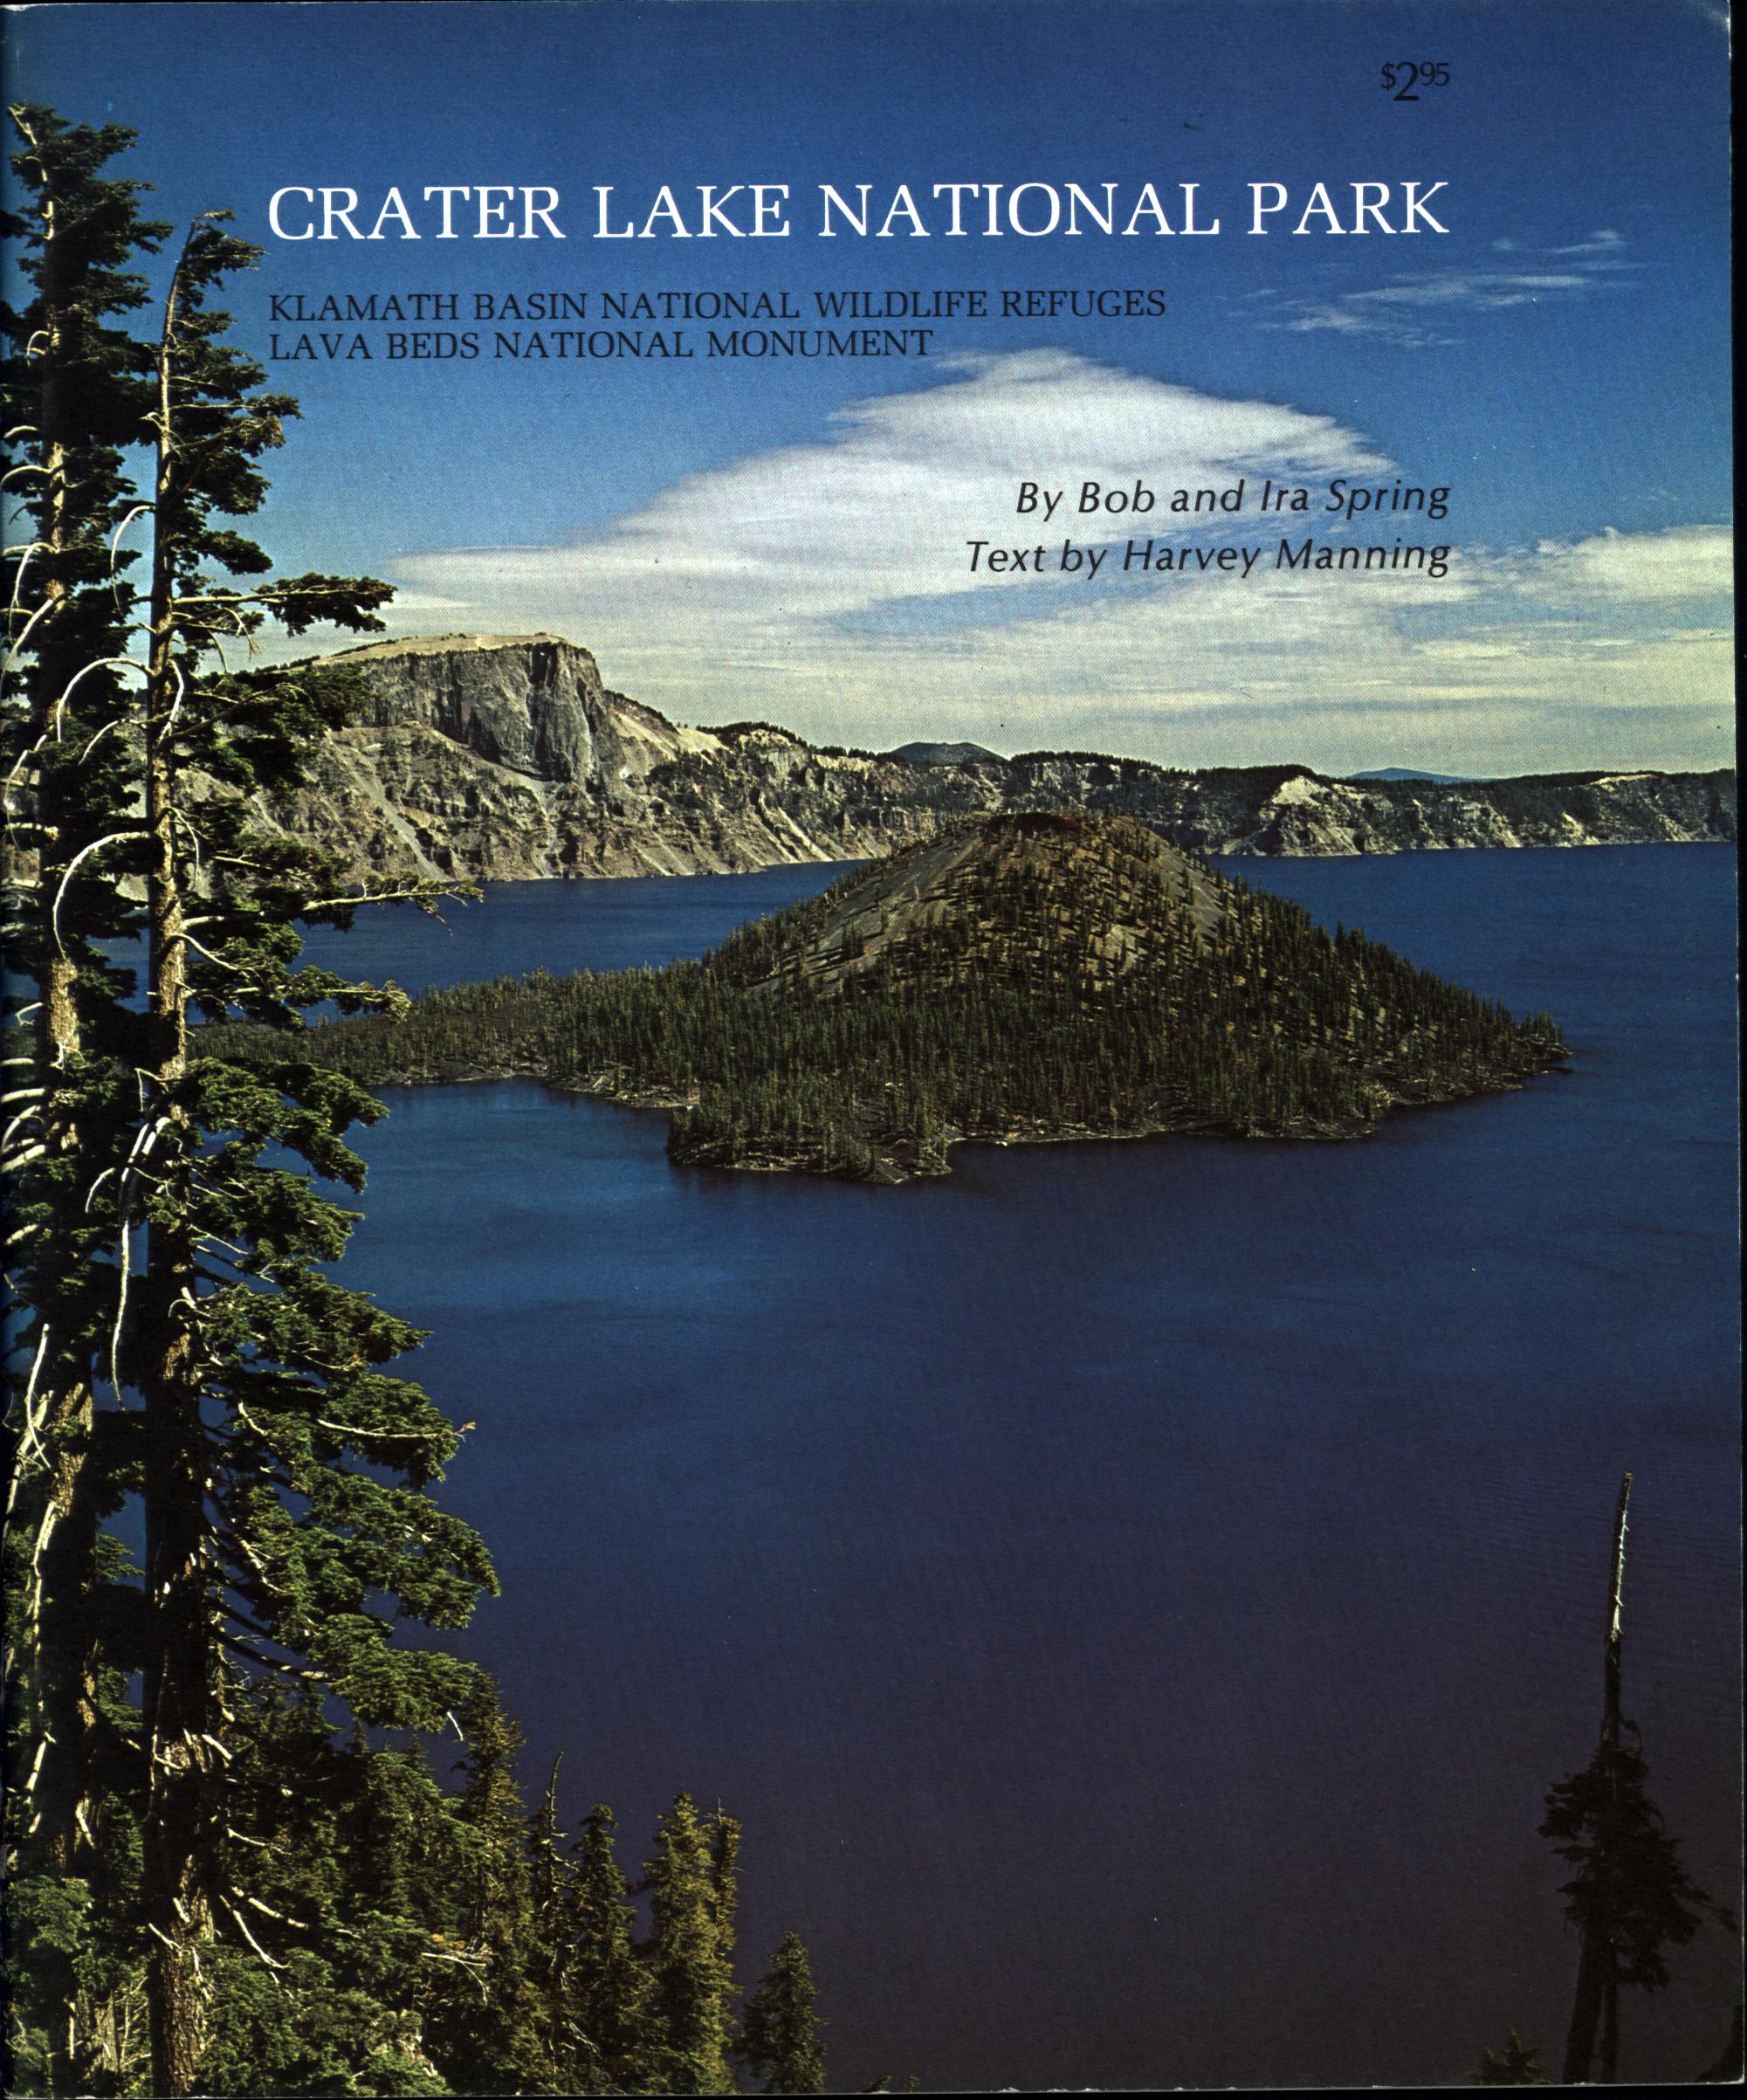 CRATER LAKE NATIONAL PARK (OR).